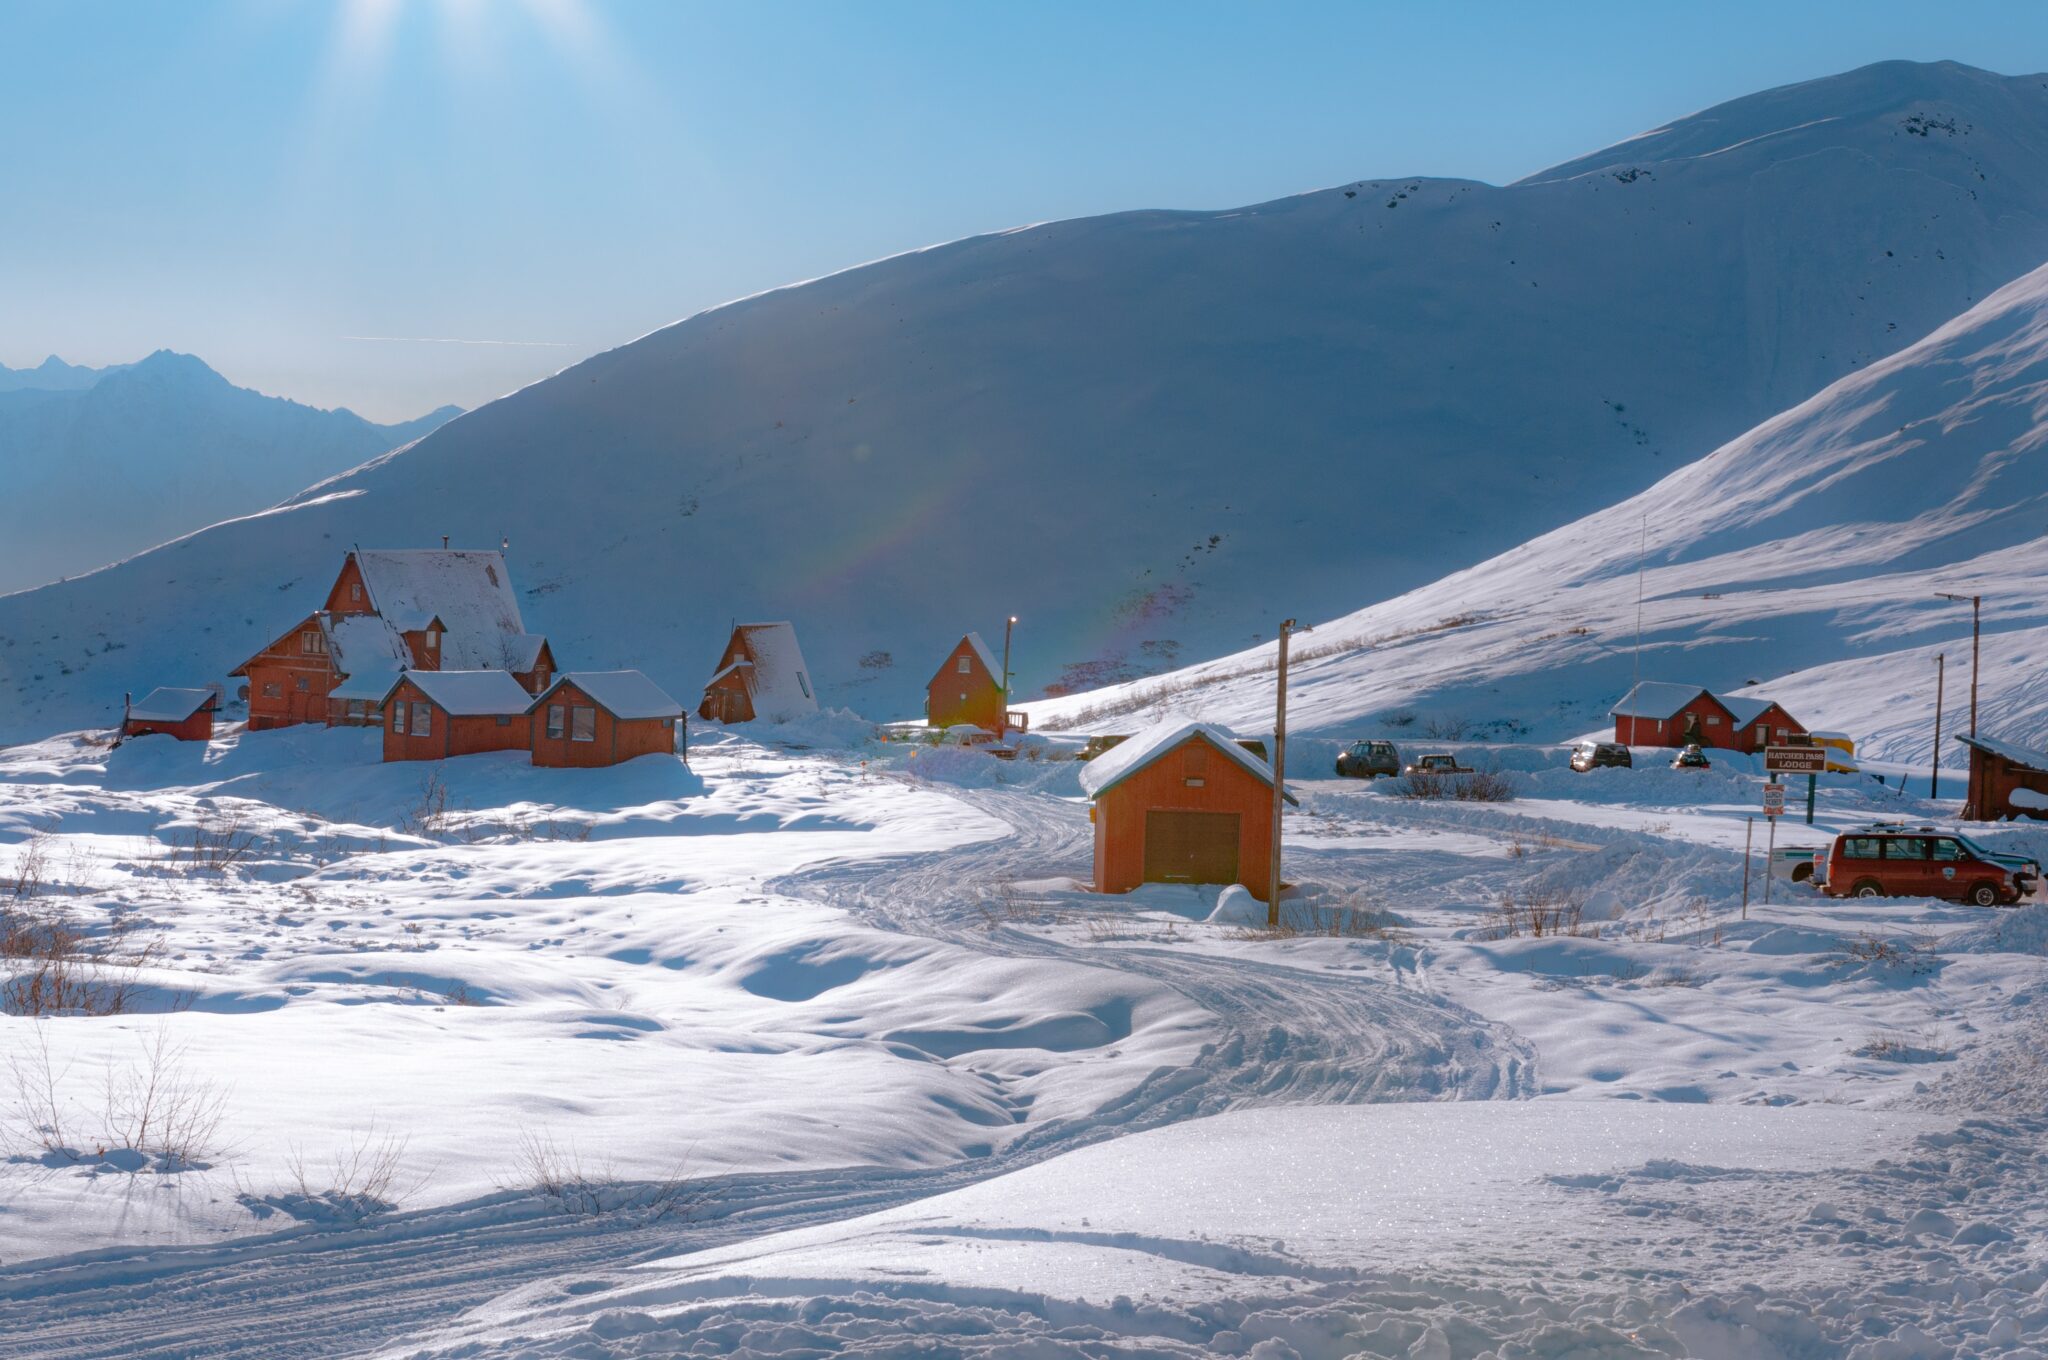 Orange houses and structures in a very snowy mountain